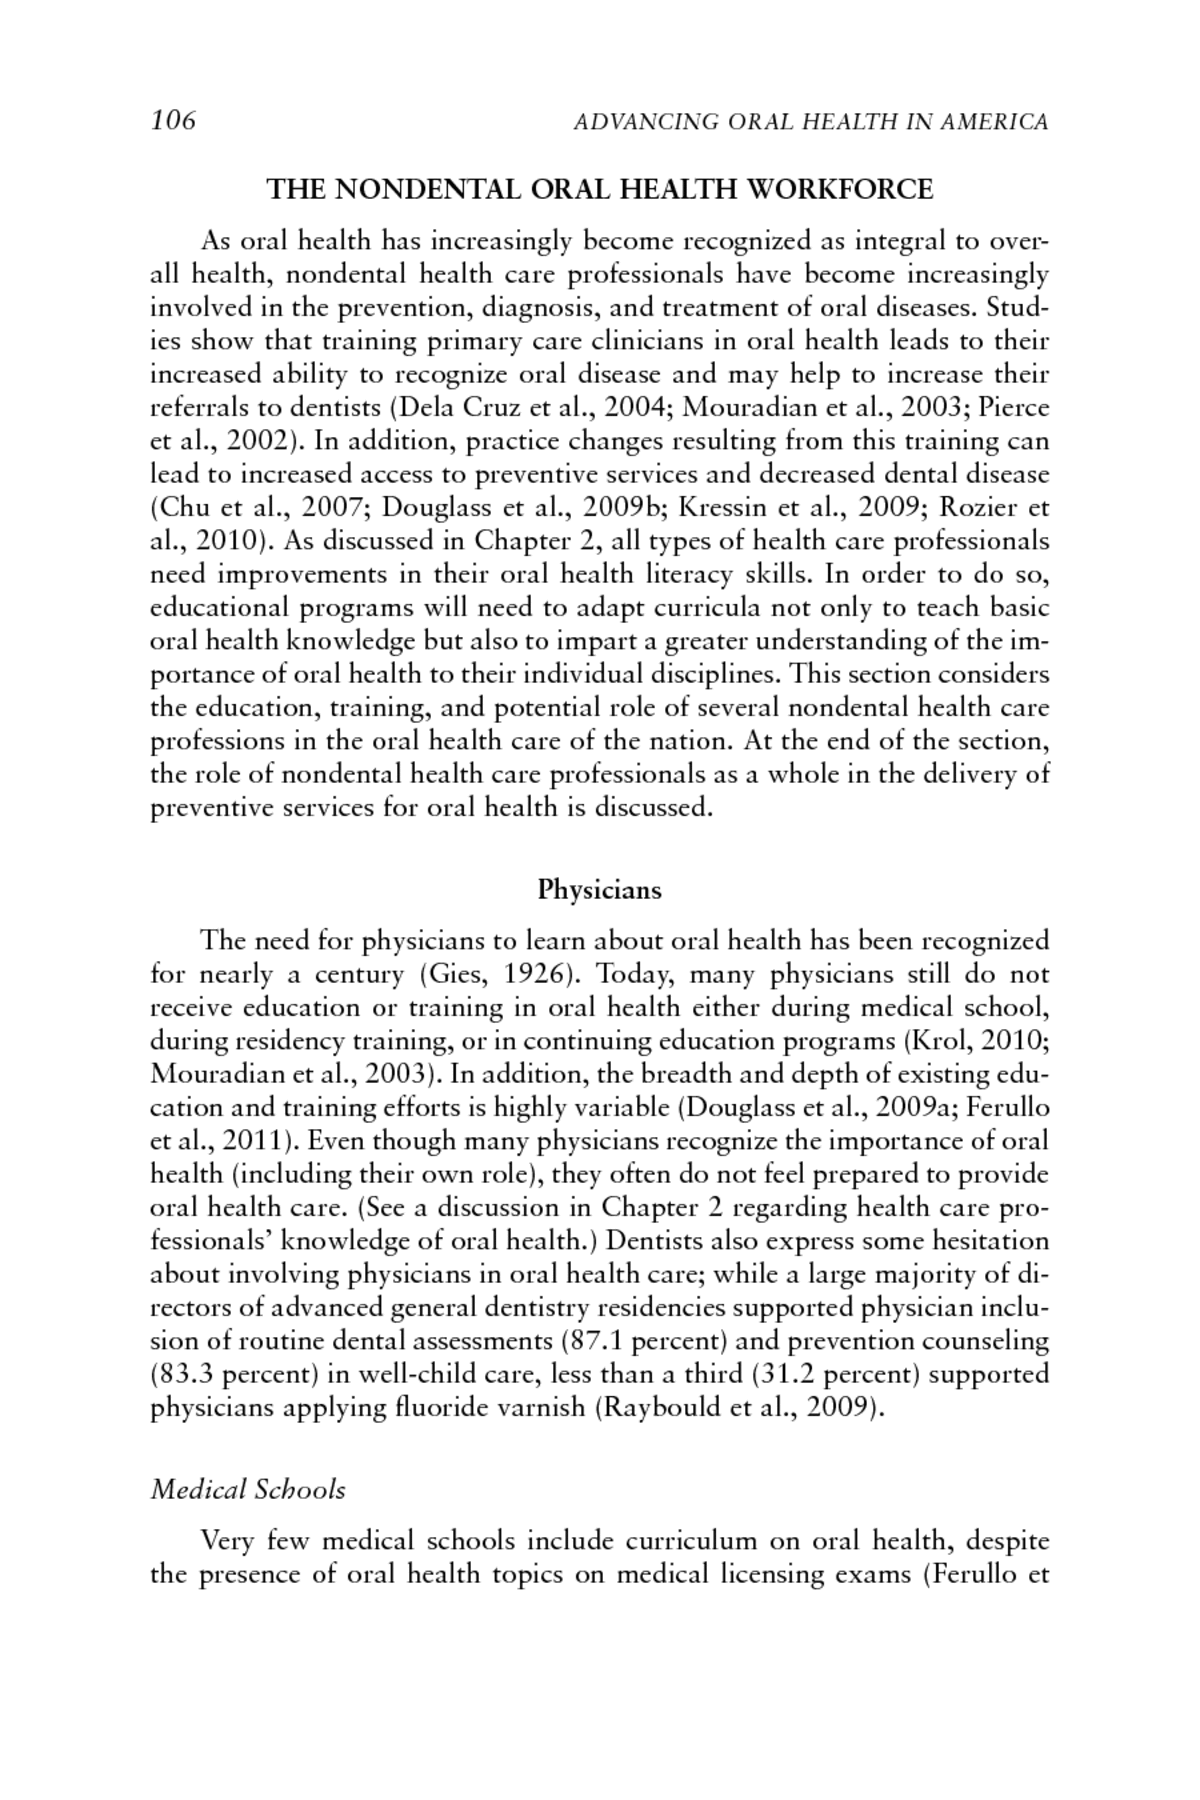 essay on health promotion for oral health